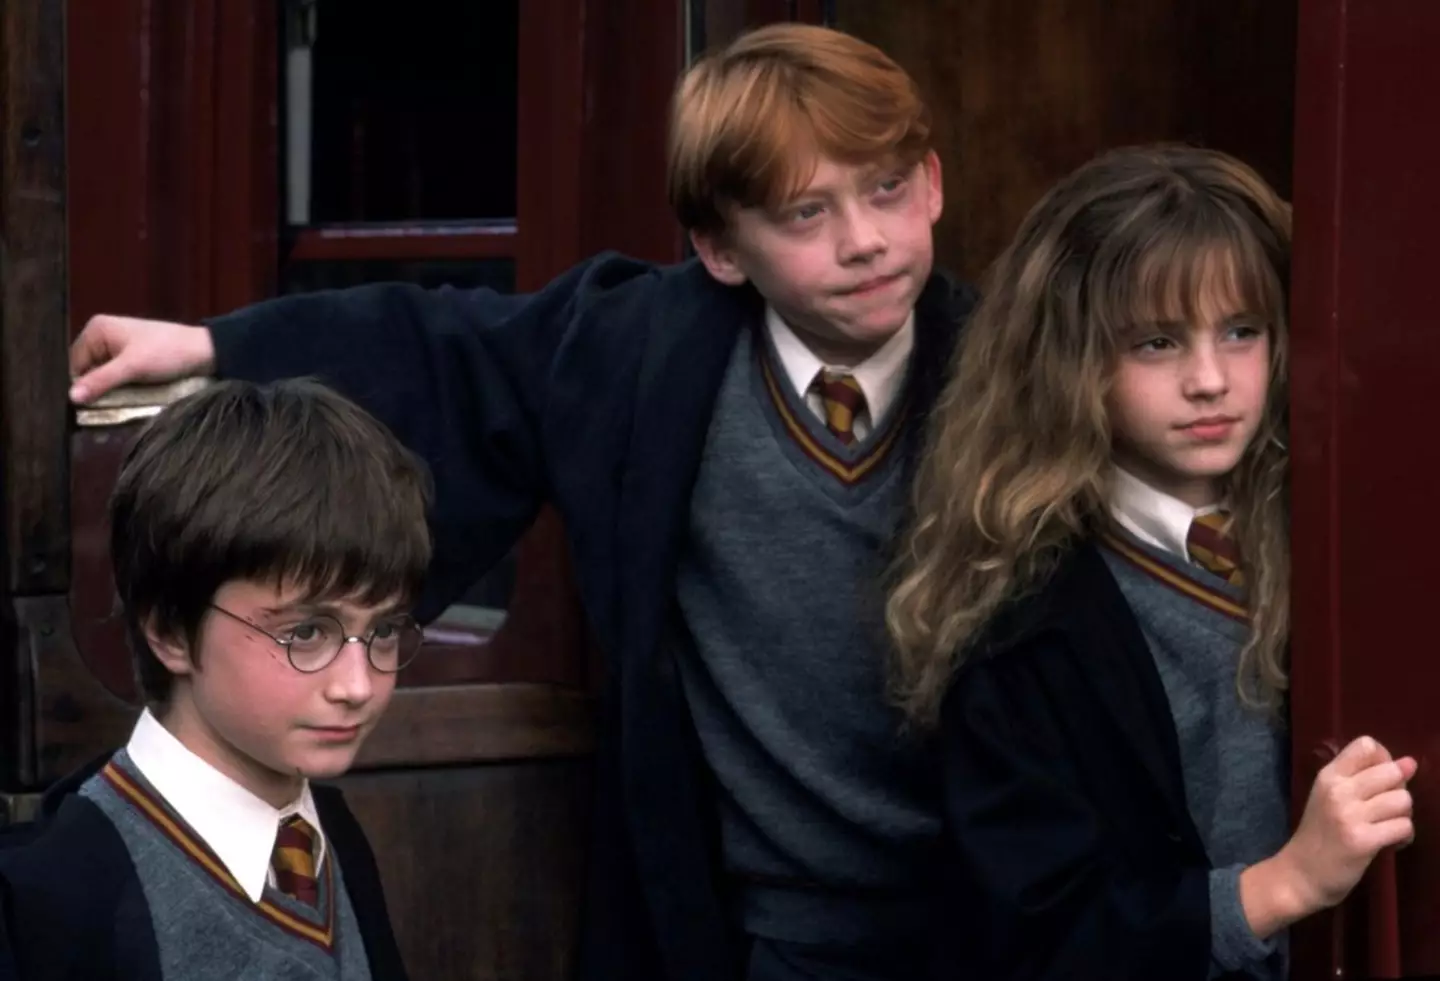 The three young Harry Potter stars became household names overnight.